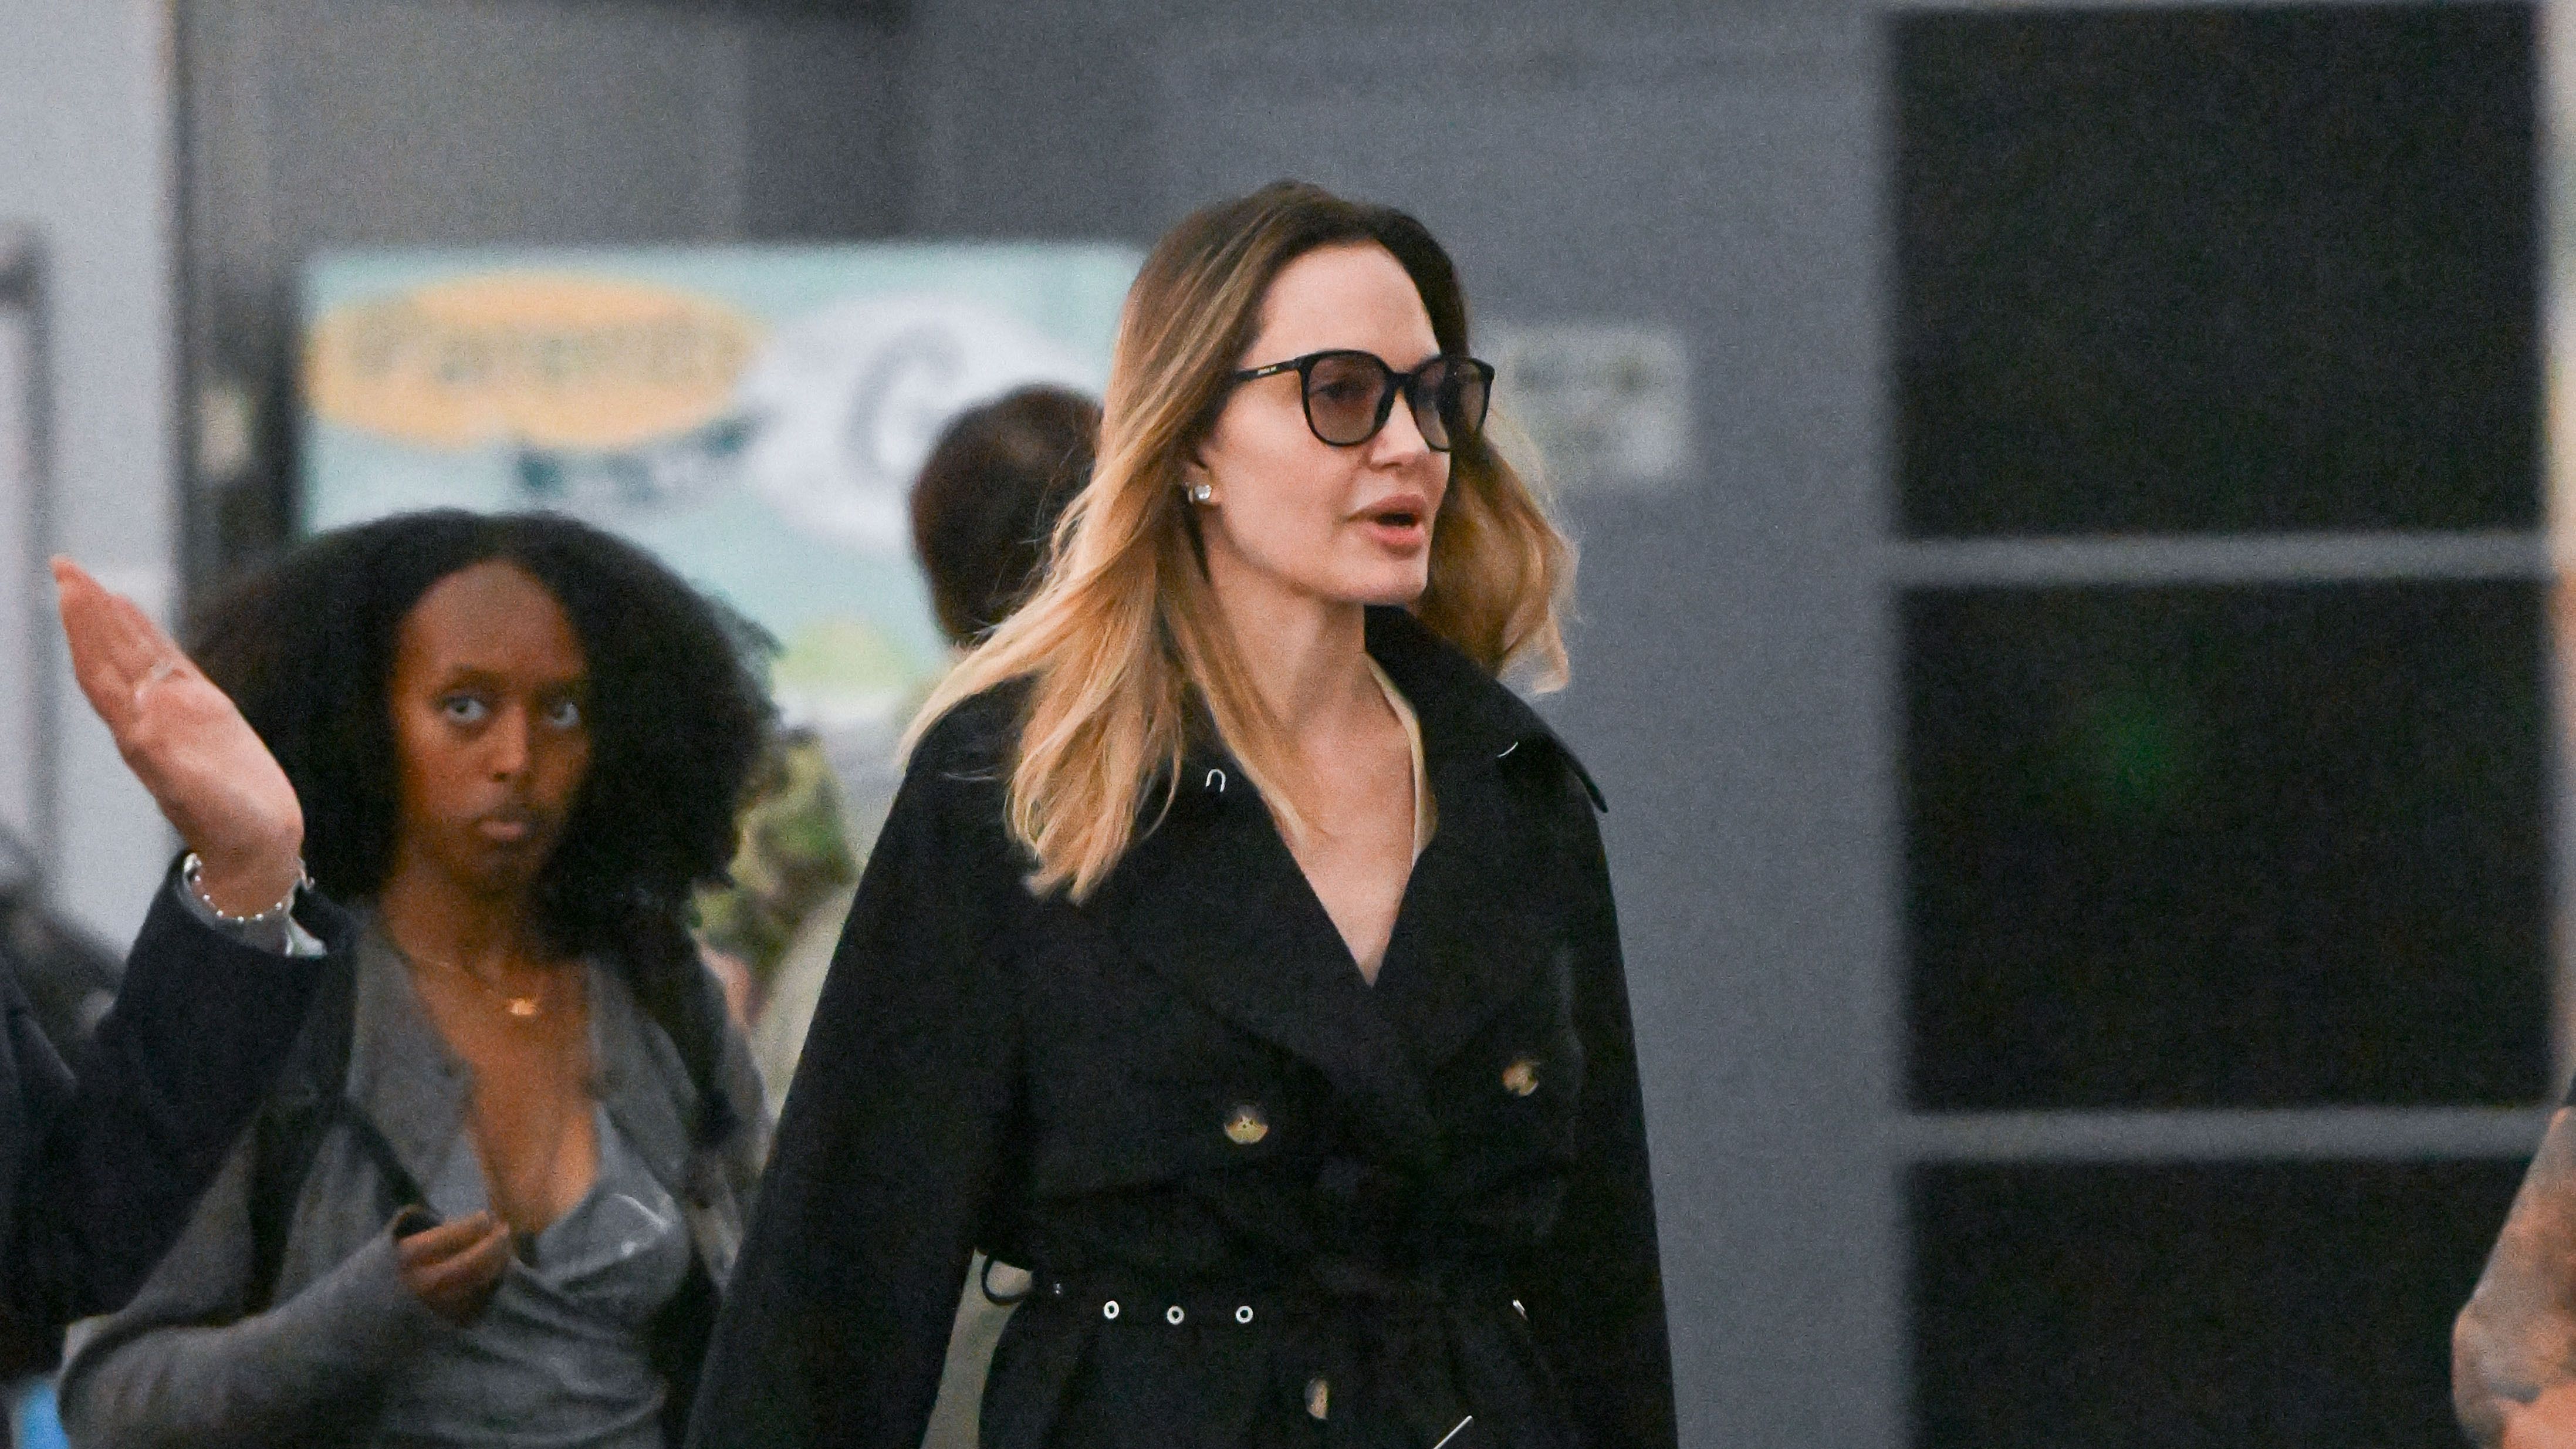 Angelina Jolie Is A High-End Fashion Chic: Know The Expensive